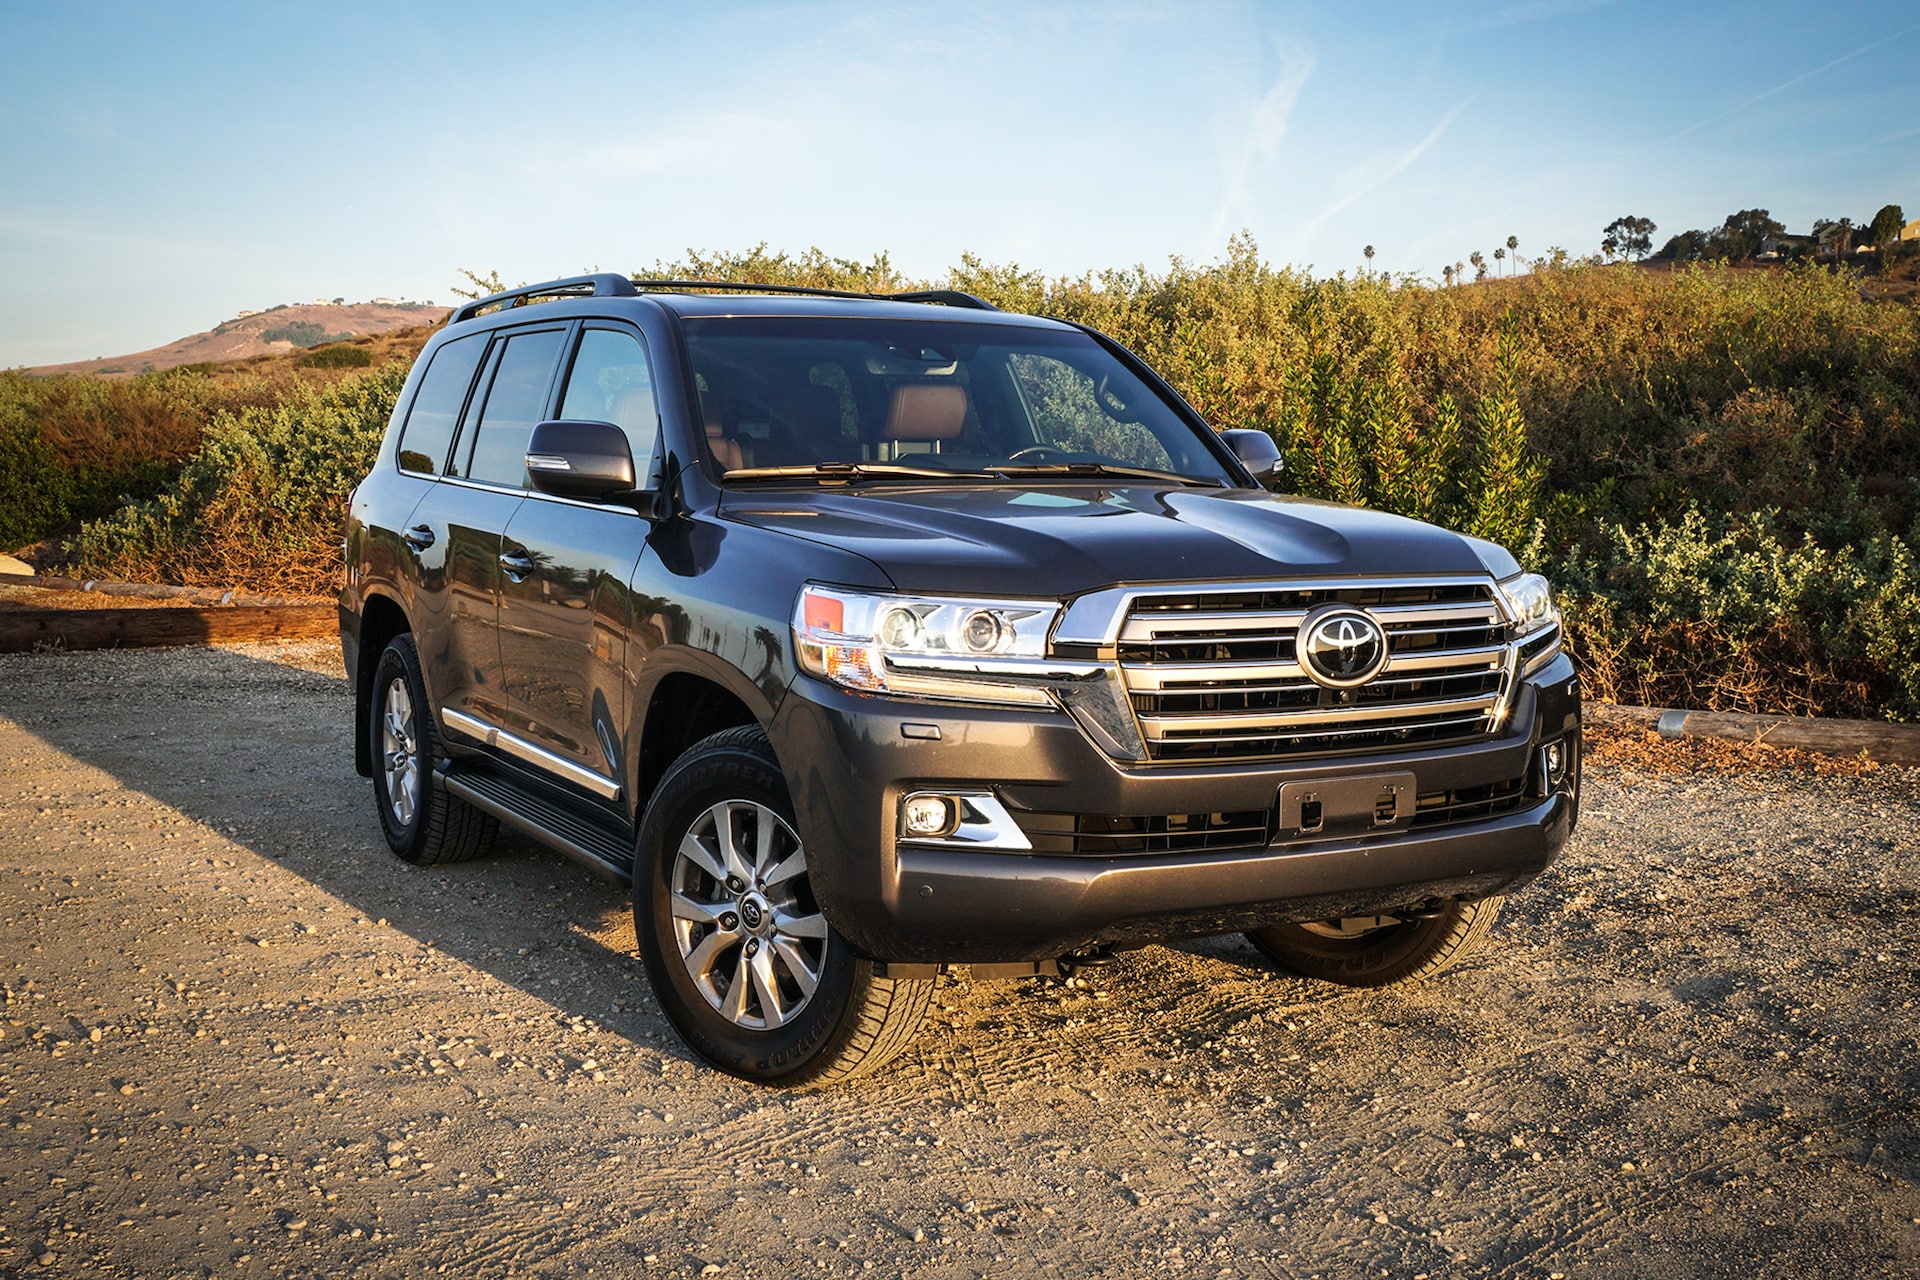 One Week With: 2018 Toyota Land Cruiser